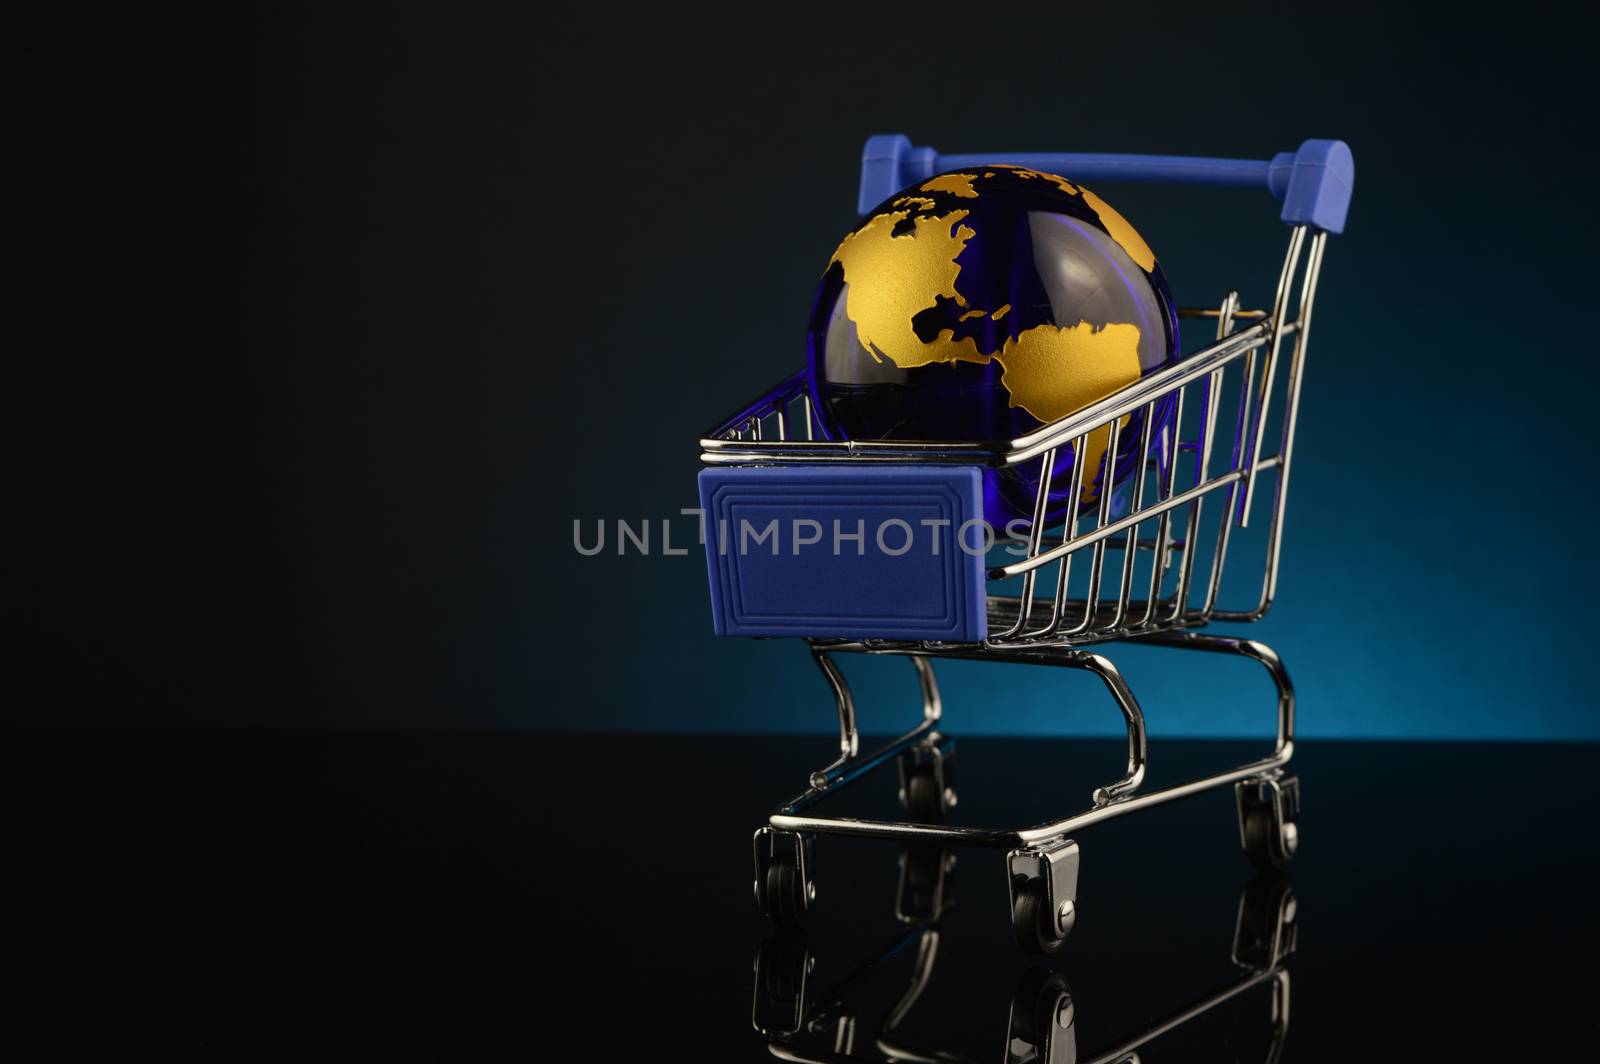 A conceptual image of global shopping over a blue background.